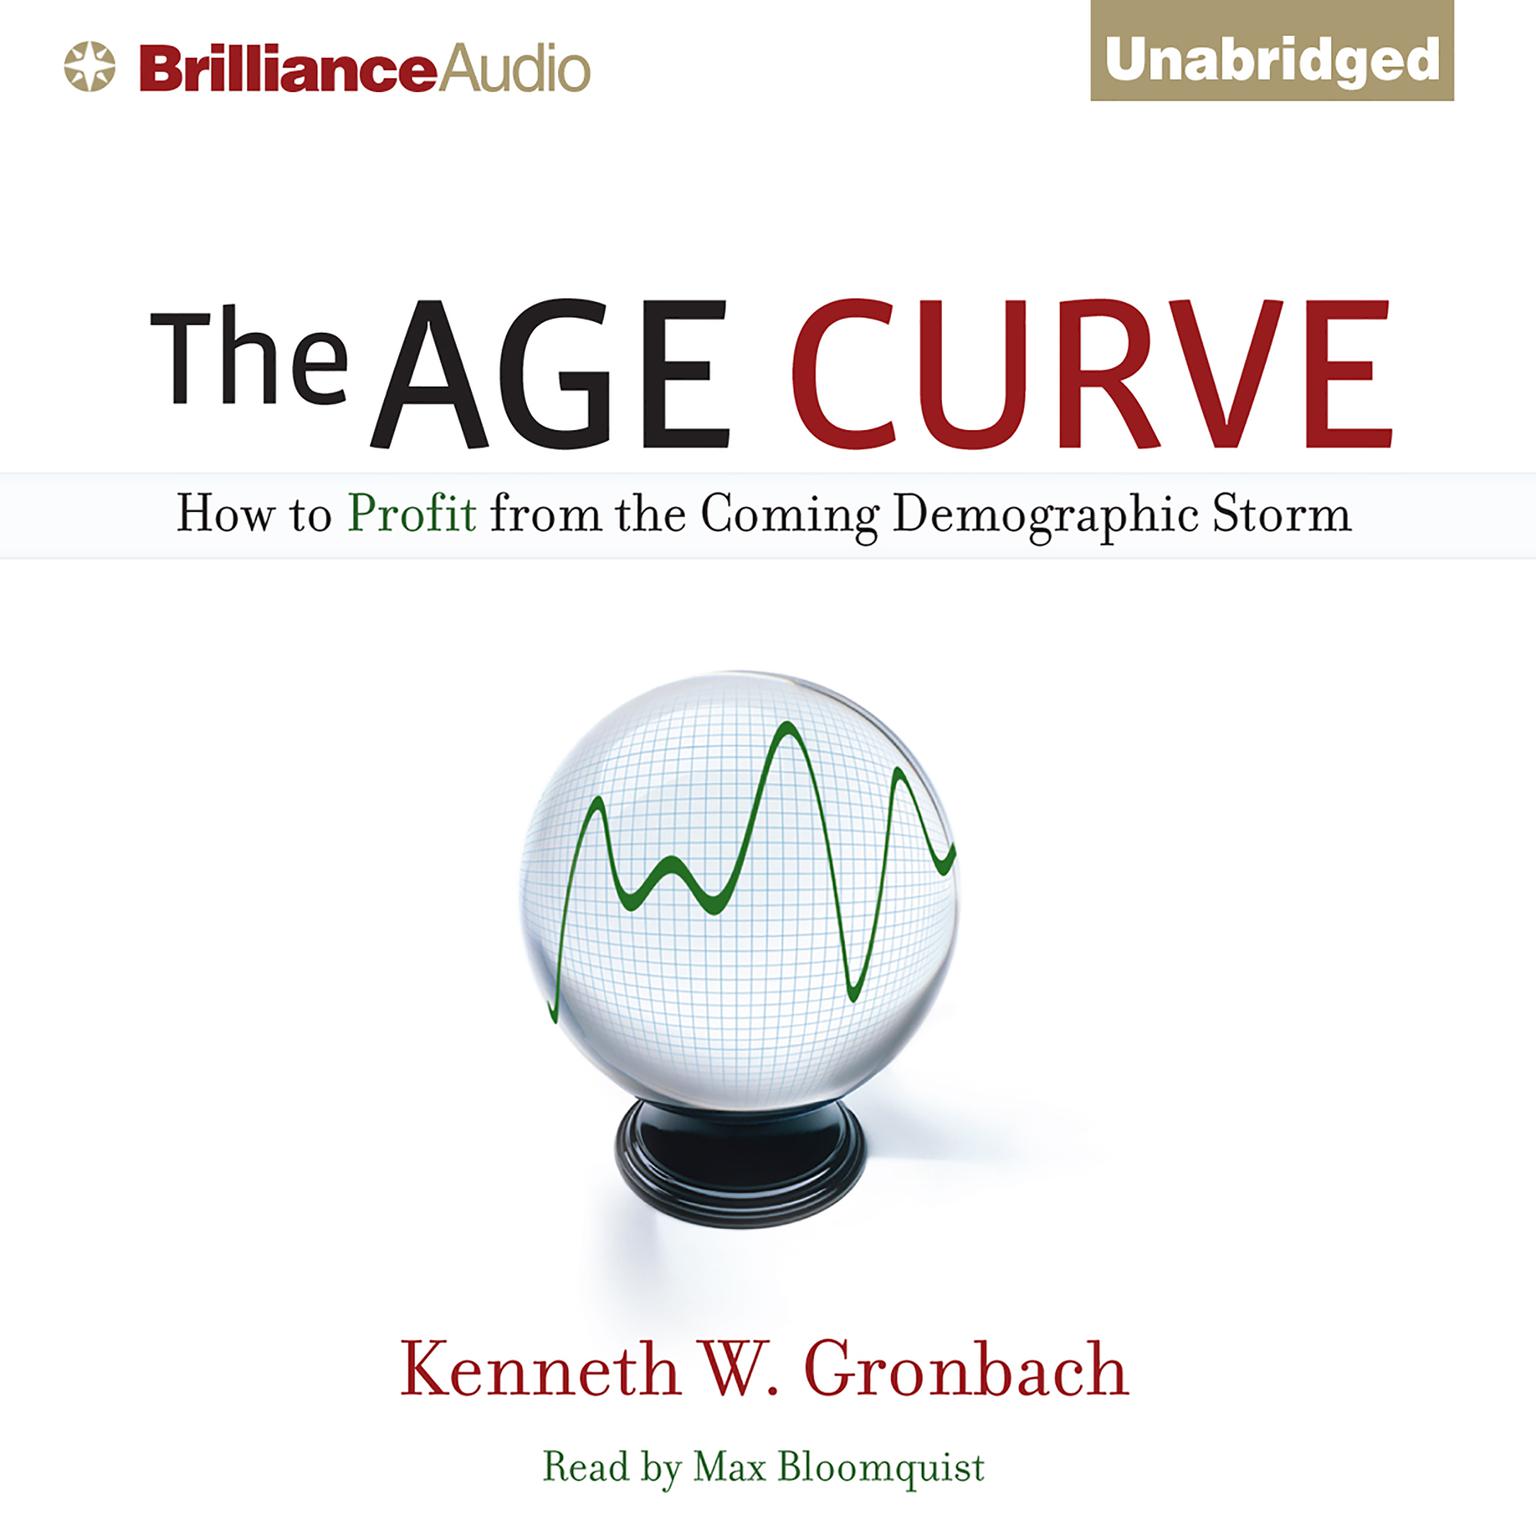 The Age Curve: How to Profit from the Coming Demographic Storm Audiobook, by Kenneth W. Gronbach